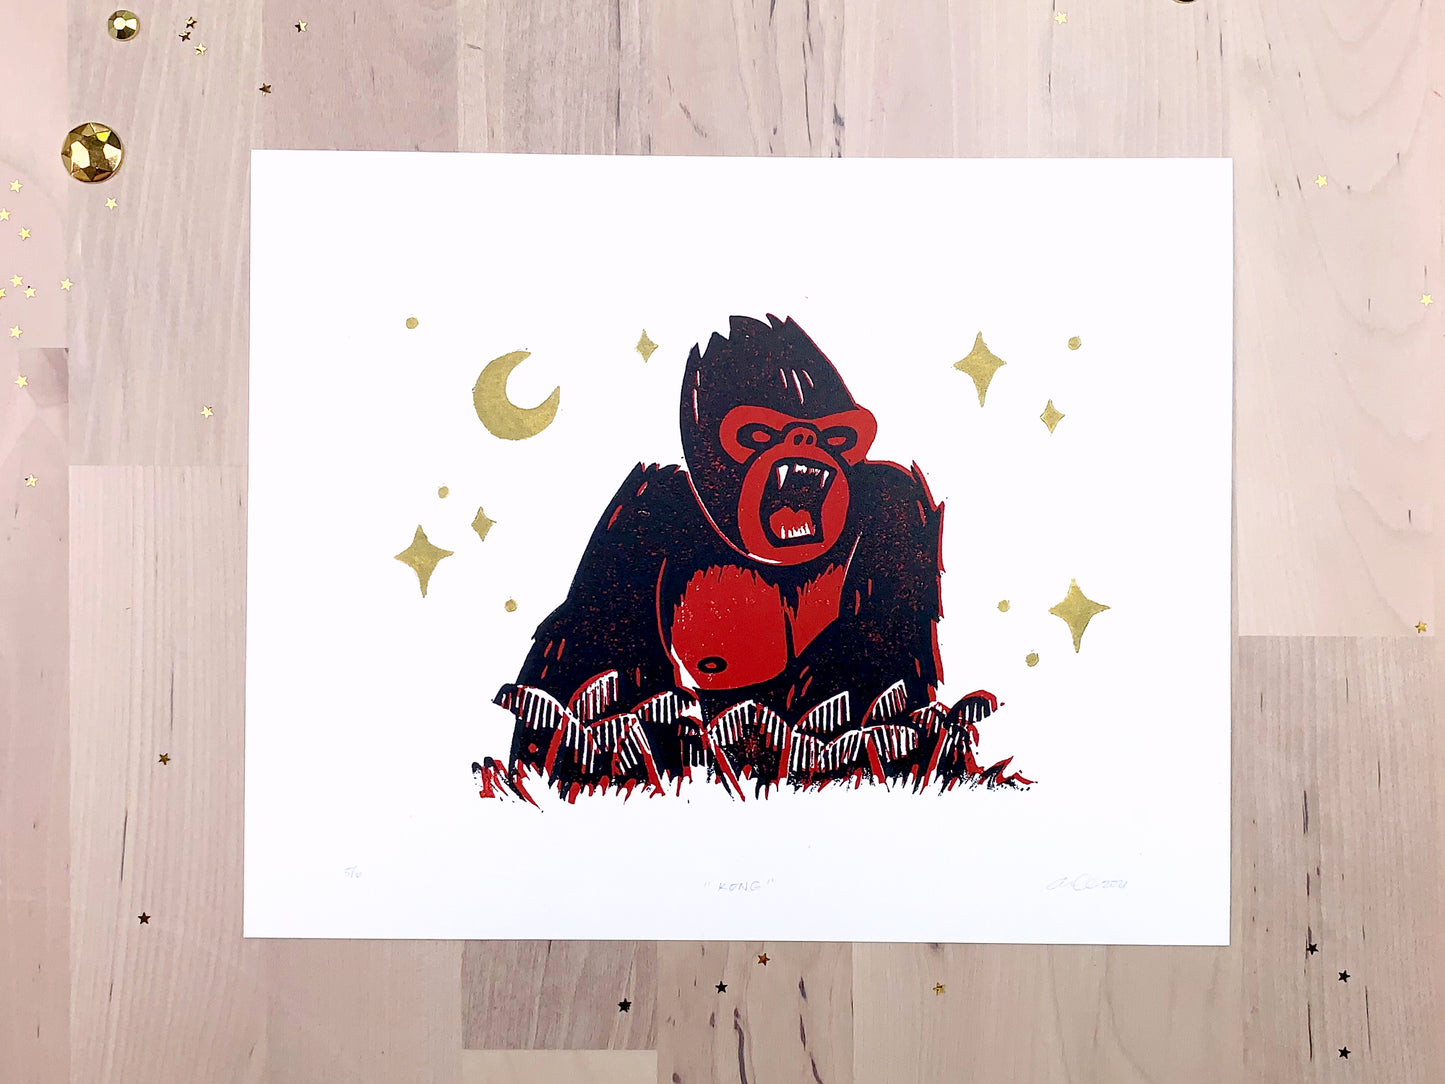 Original limited #5 edition art print by Amber Orenstein. Two color, red and black, reduction block print of a King Kong roaring on his jungle island home with gold stars and moon.